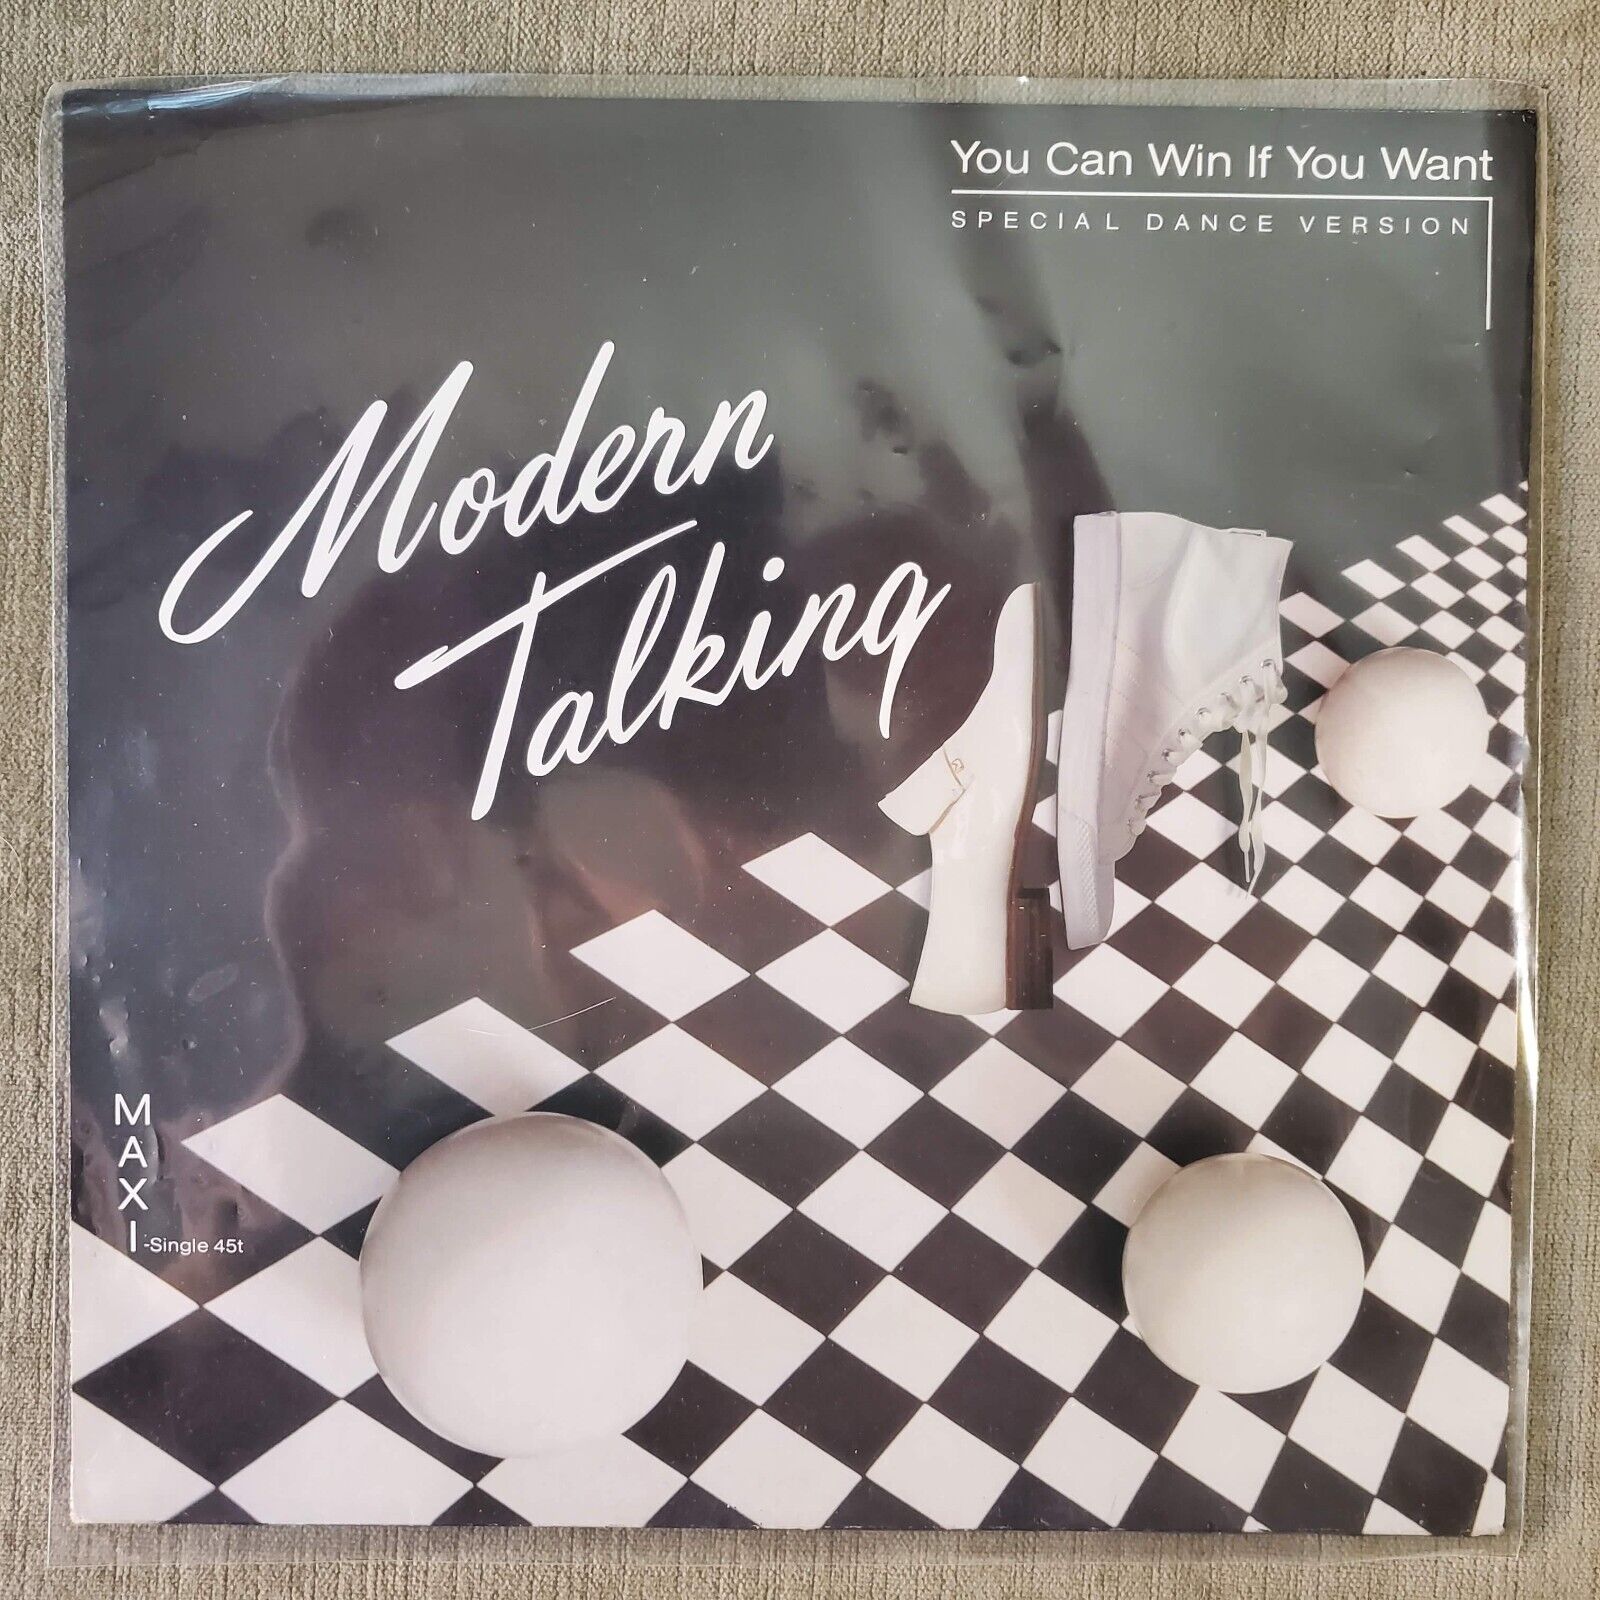 Modern Talking – You Can Win If You Want (Special Dance Version), 1985 Germany